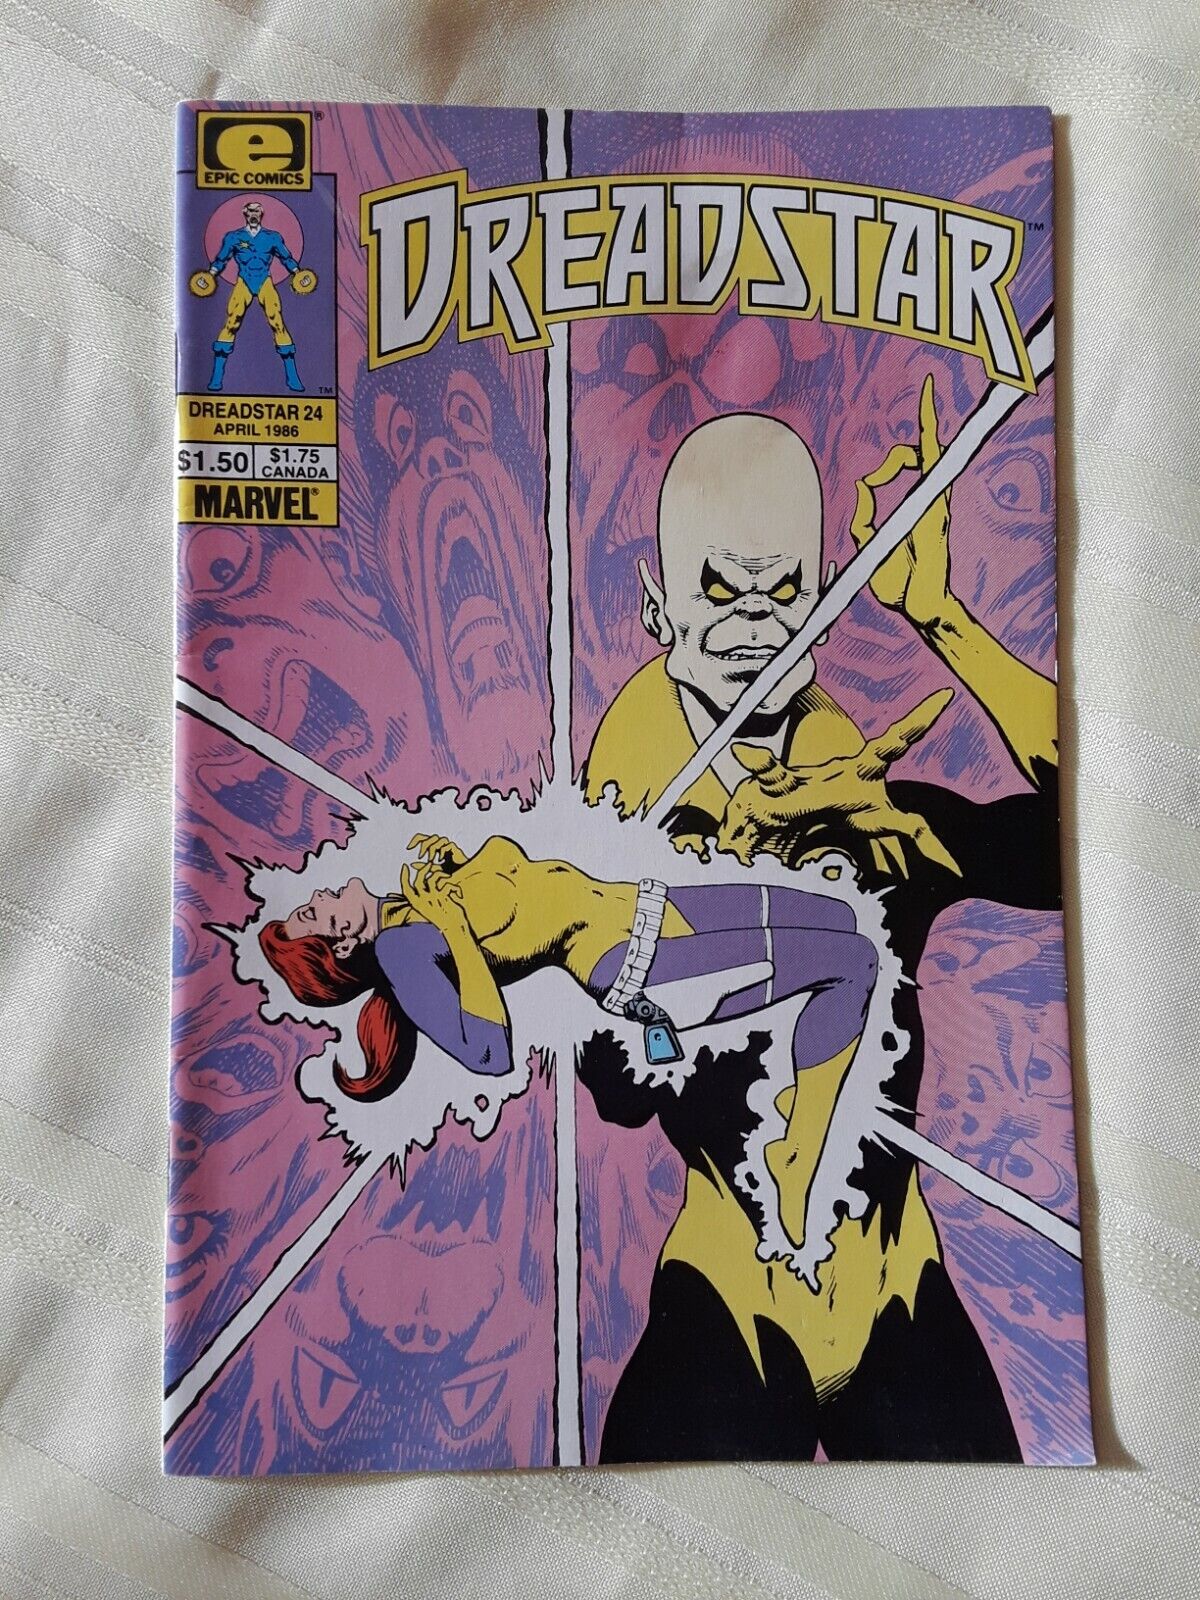 DREADSTAR  (April 1986)  (MARVEL/EPIC) #24 Comic Book- Great Condition